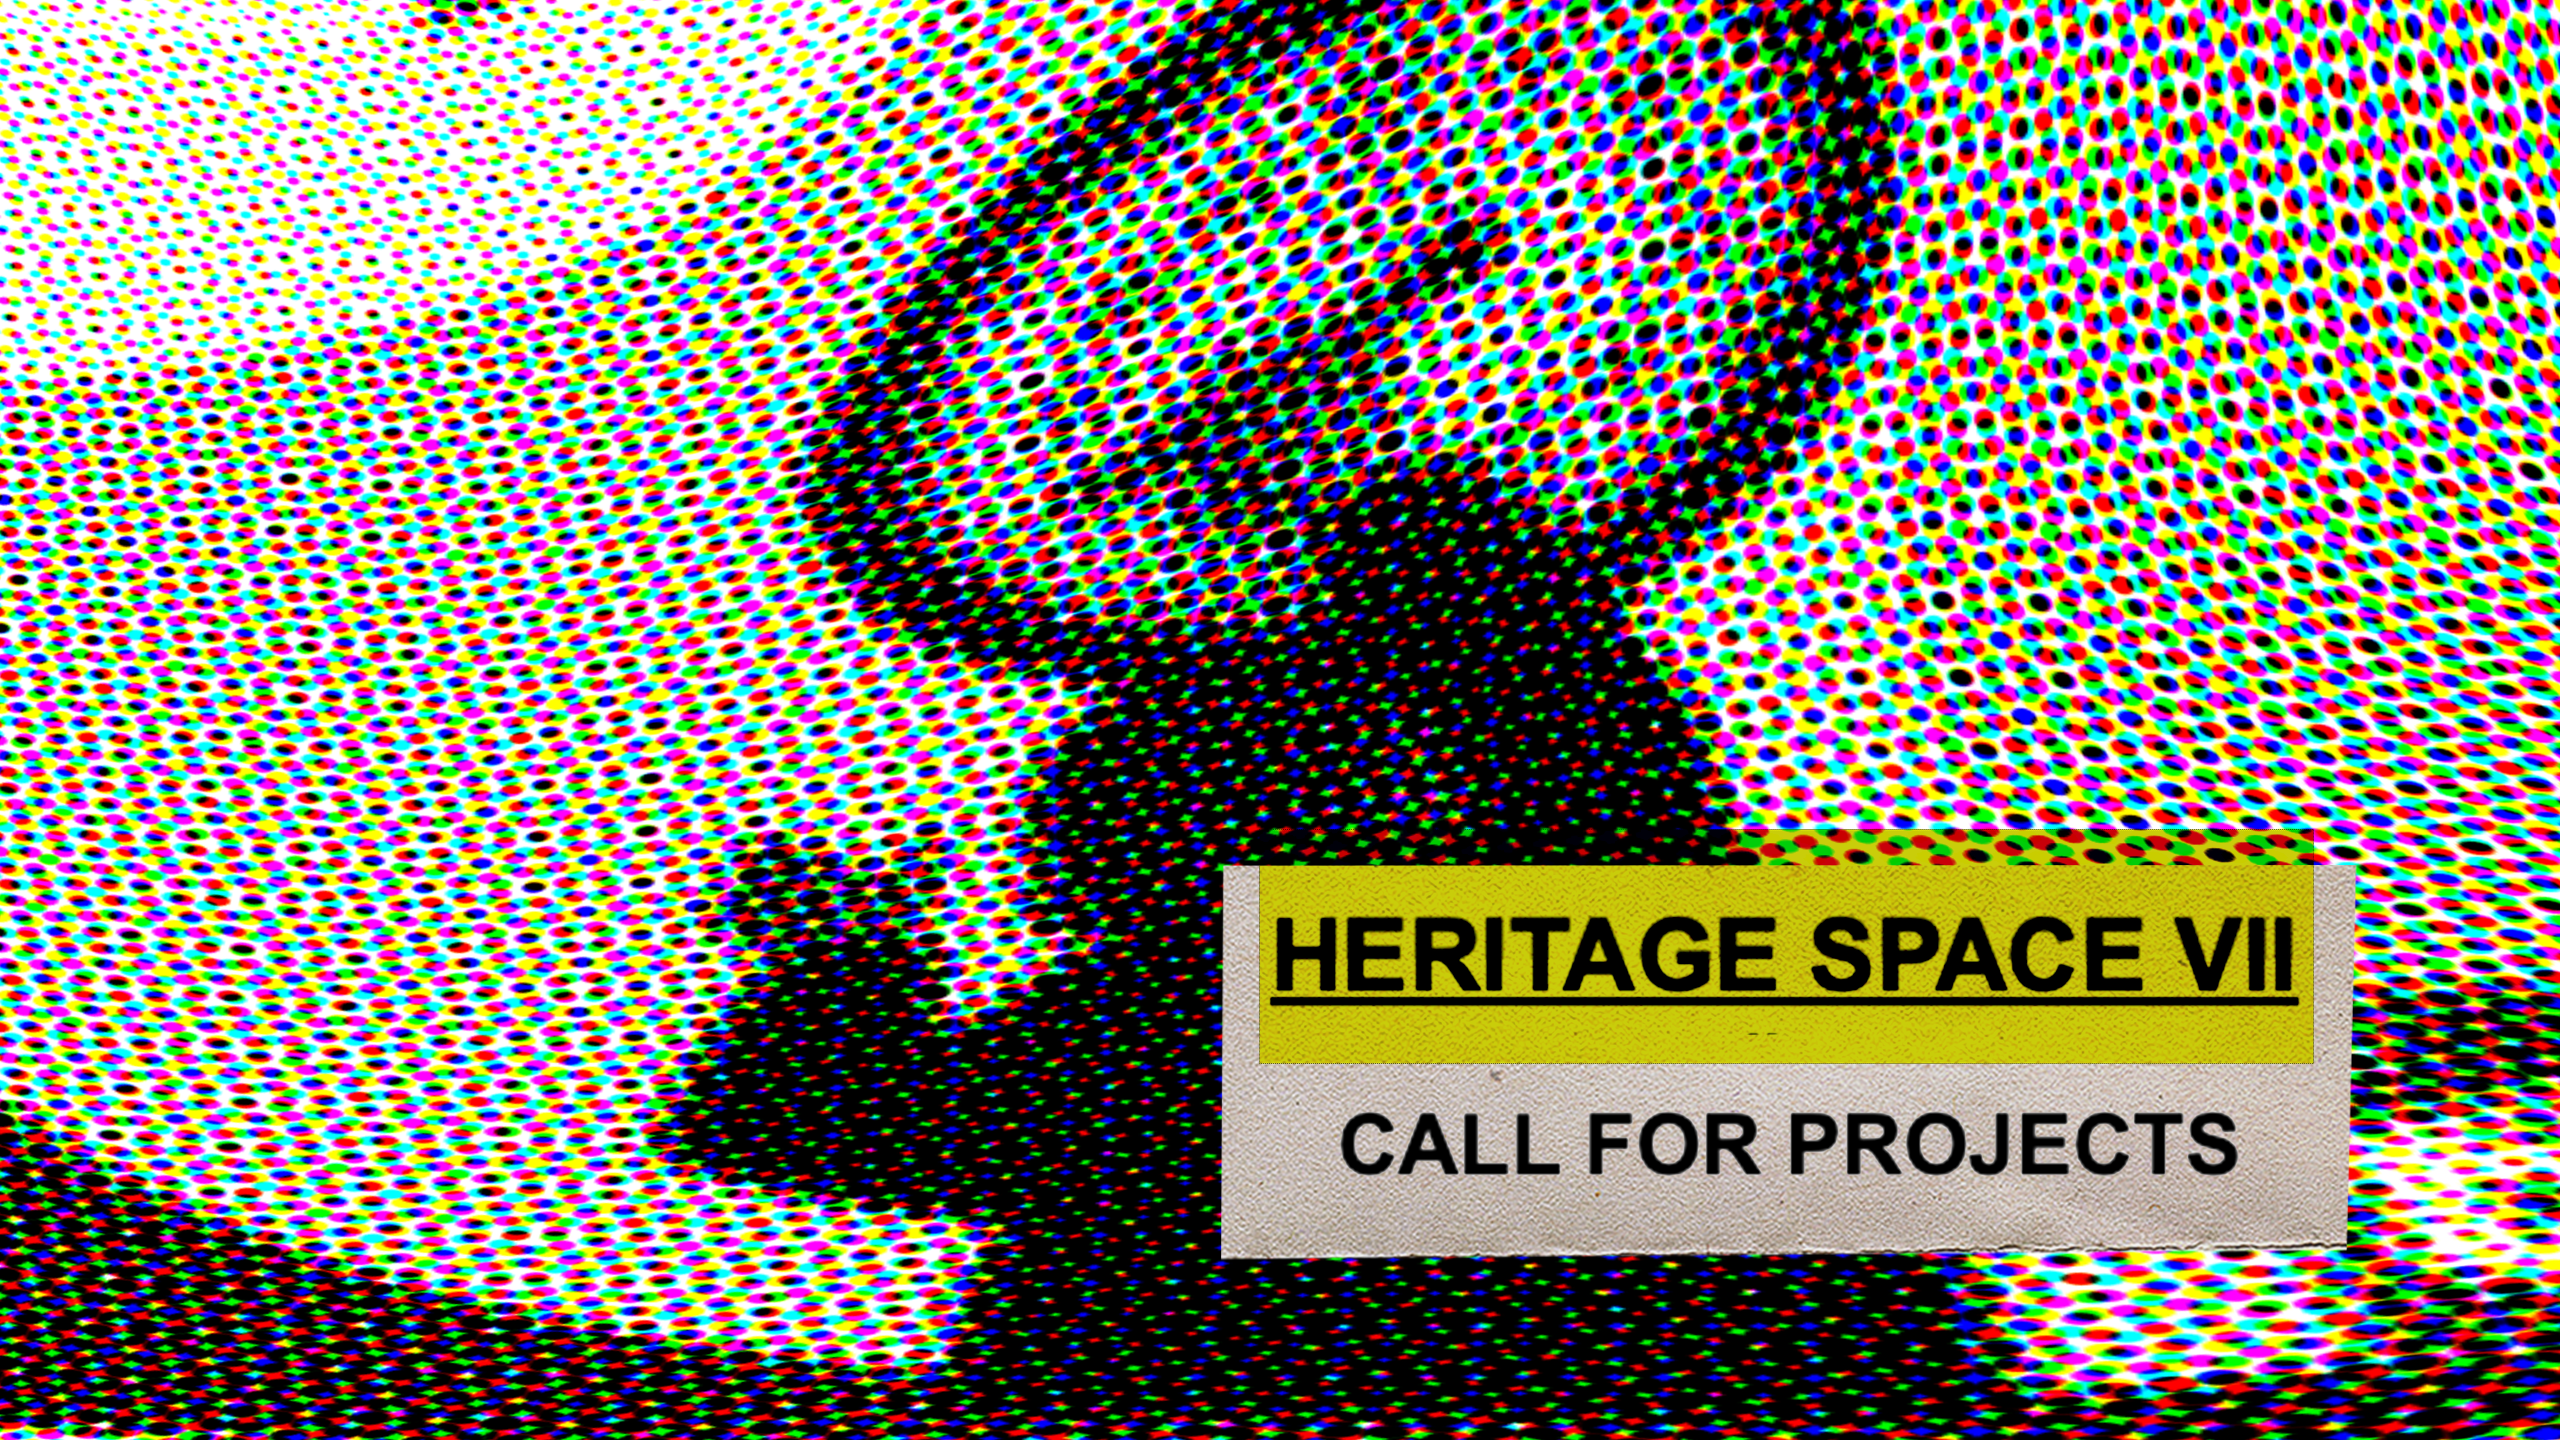 CALL FOR PROJECTS – HERITAGE SPACE VII